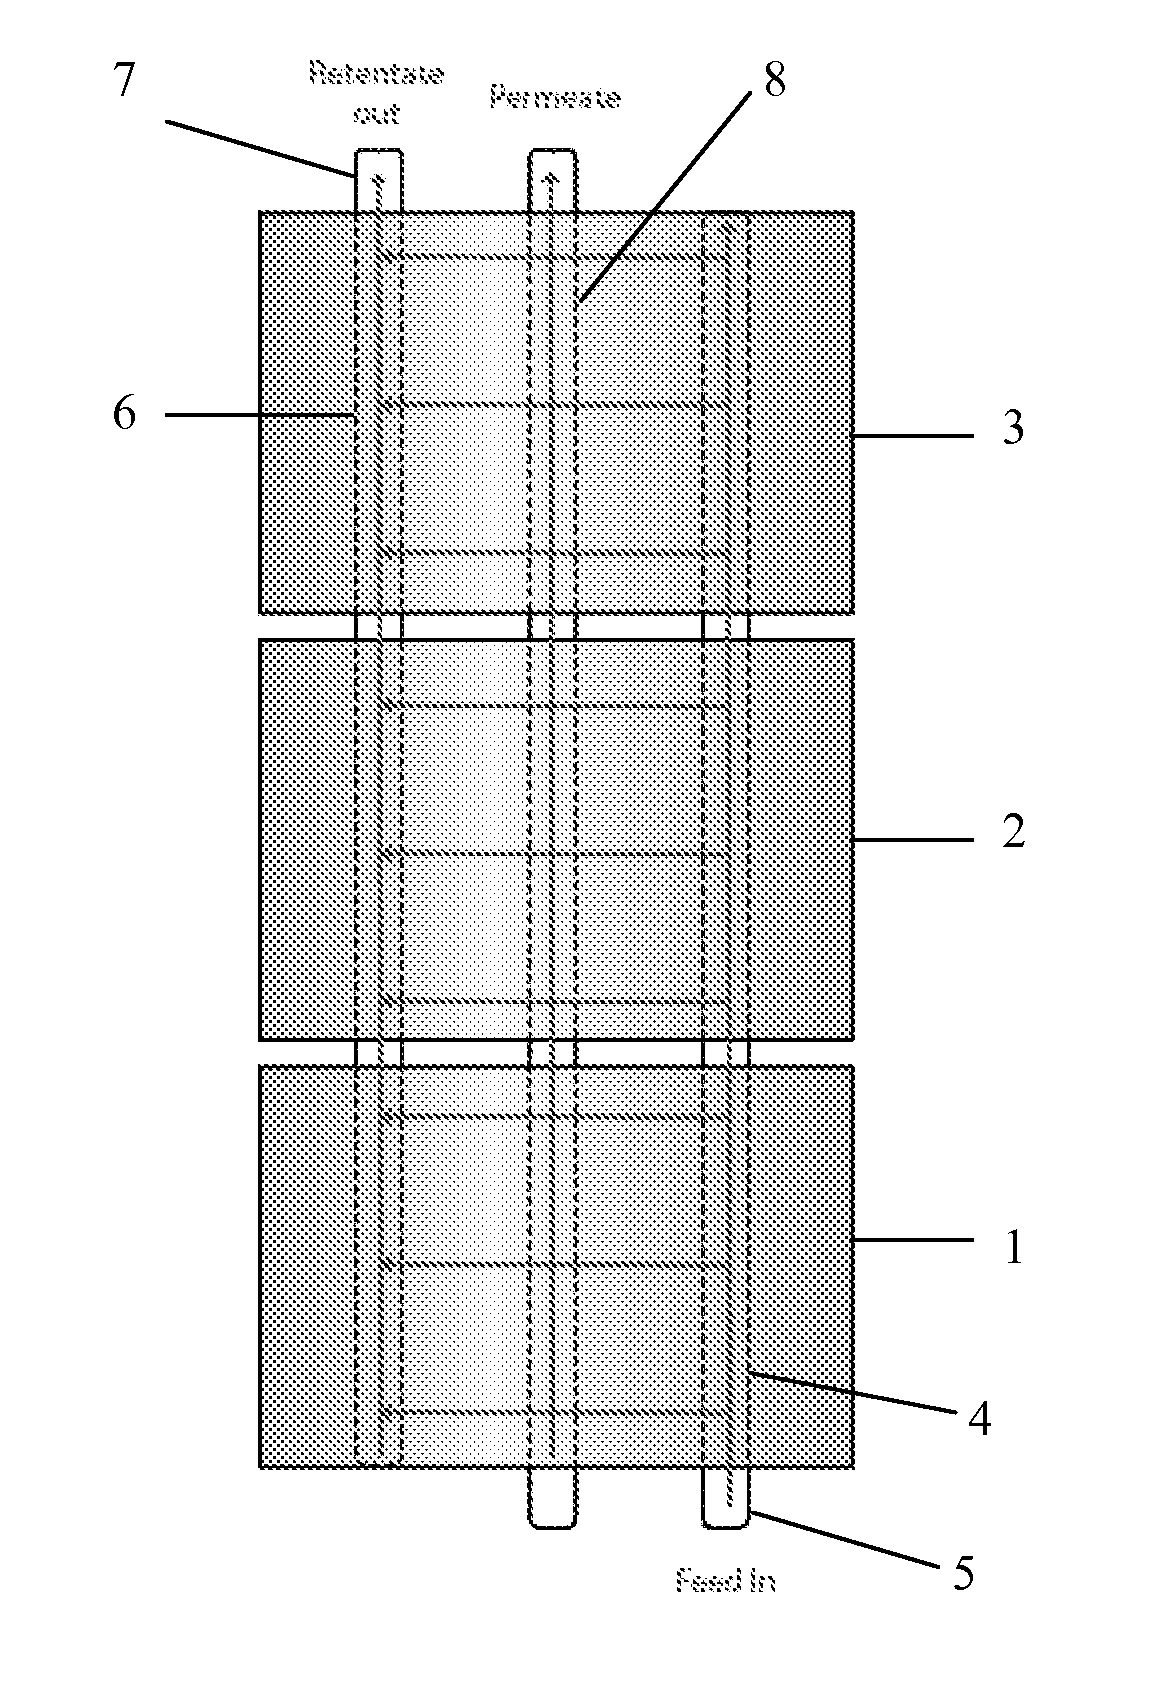 Single-pass filtration systems and processes